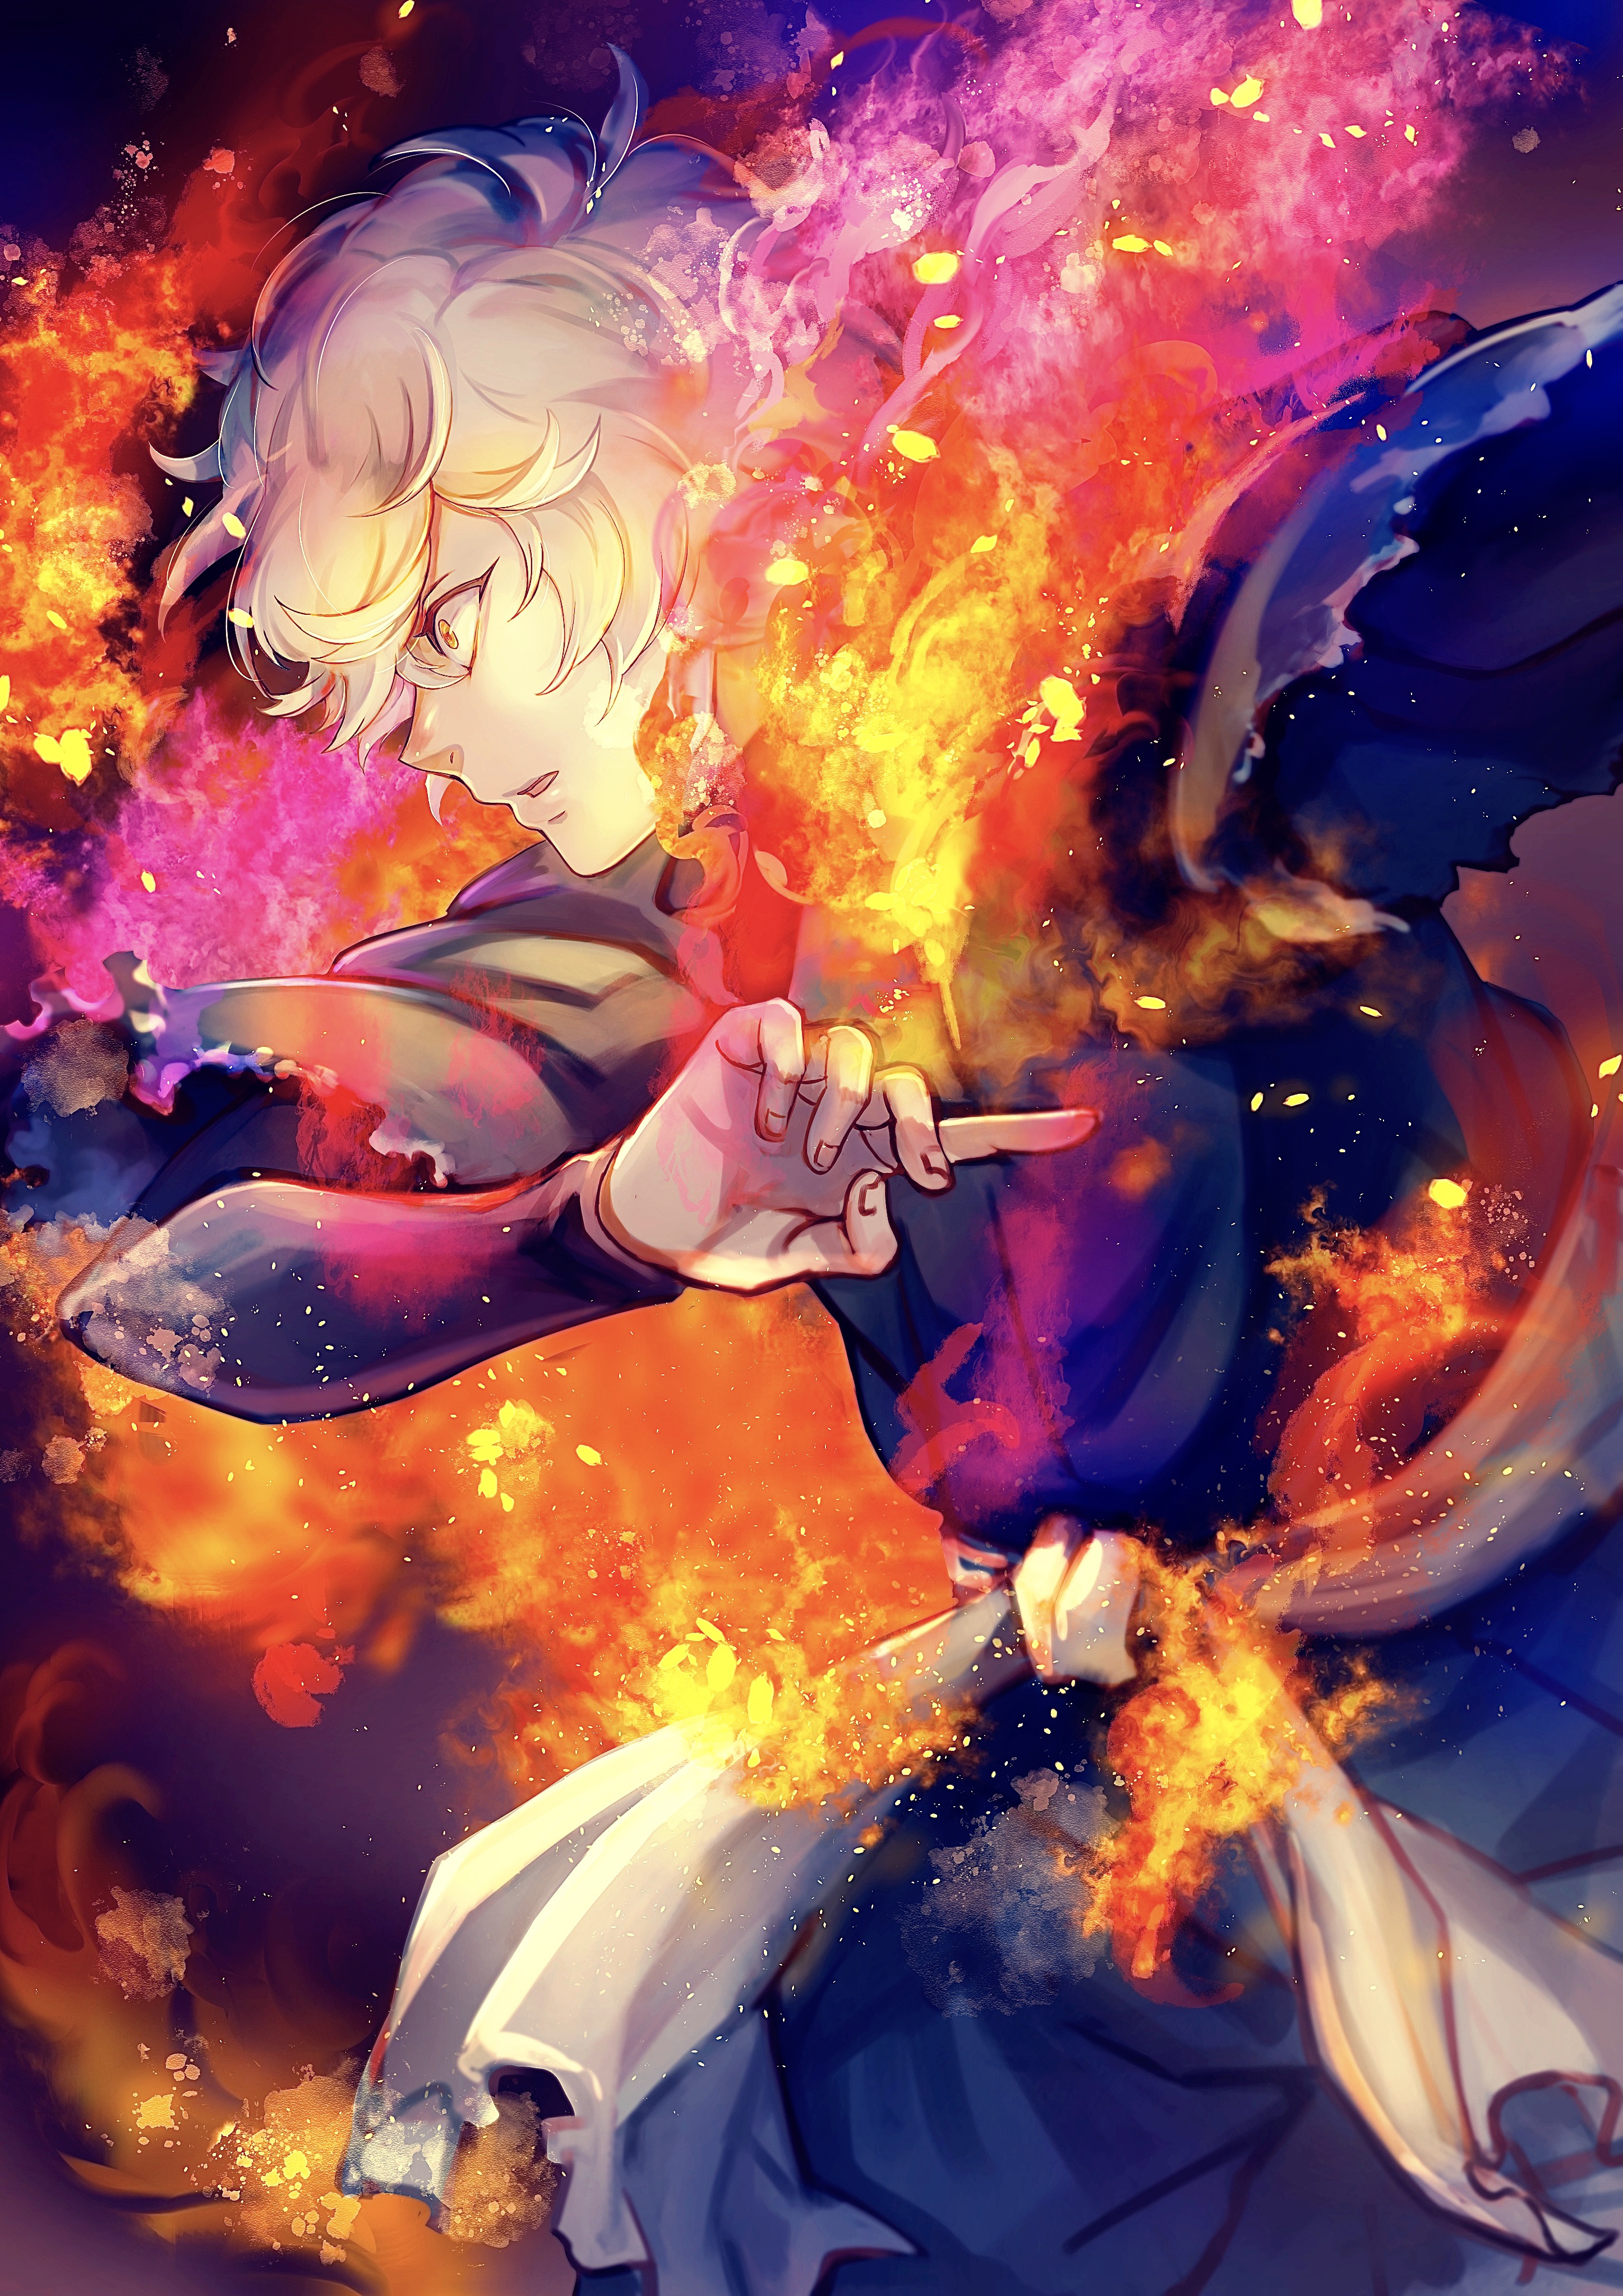 HD wallpaper male anime charater аnime boy anger fire cloud people   Wallpaper Flare